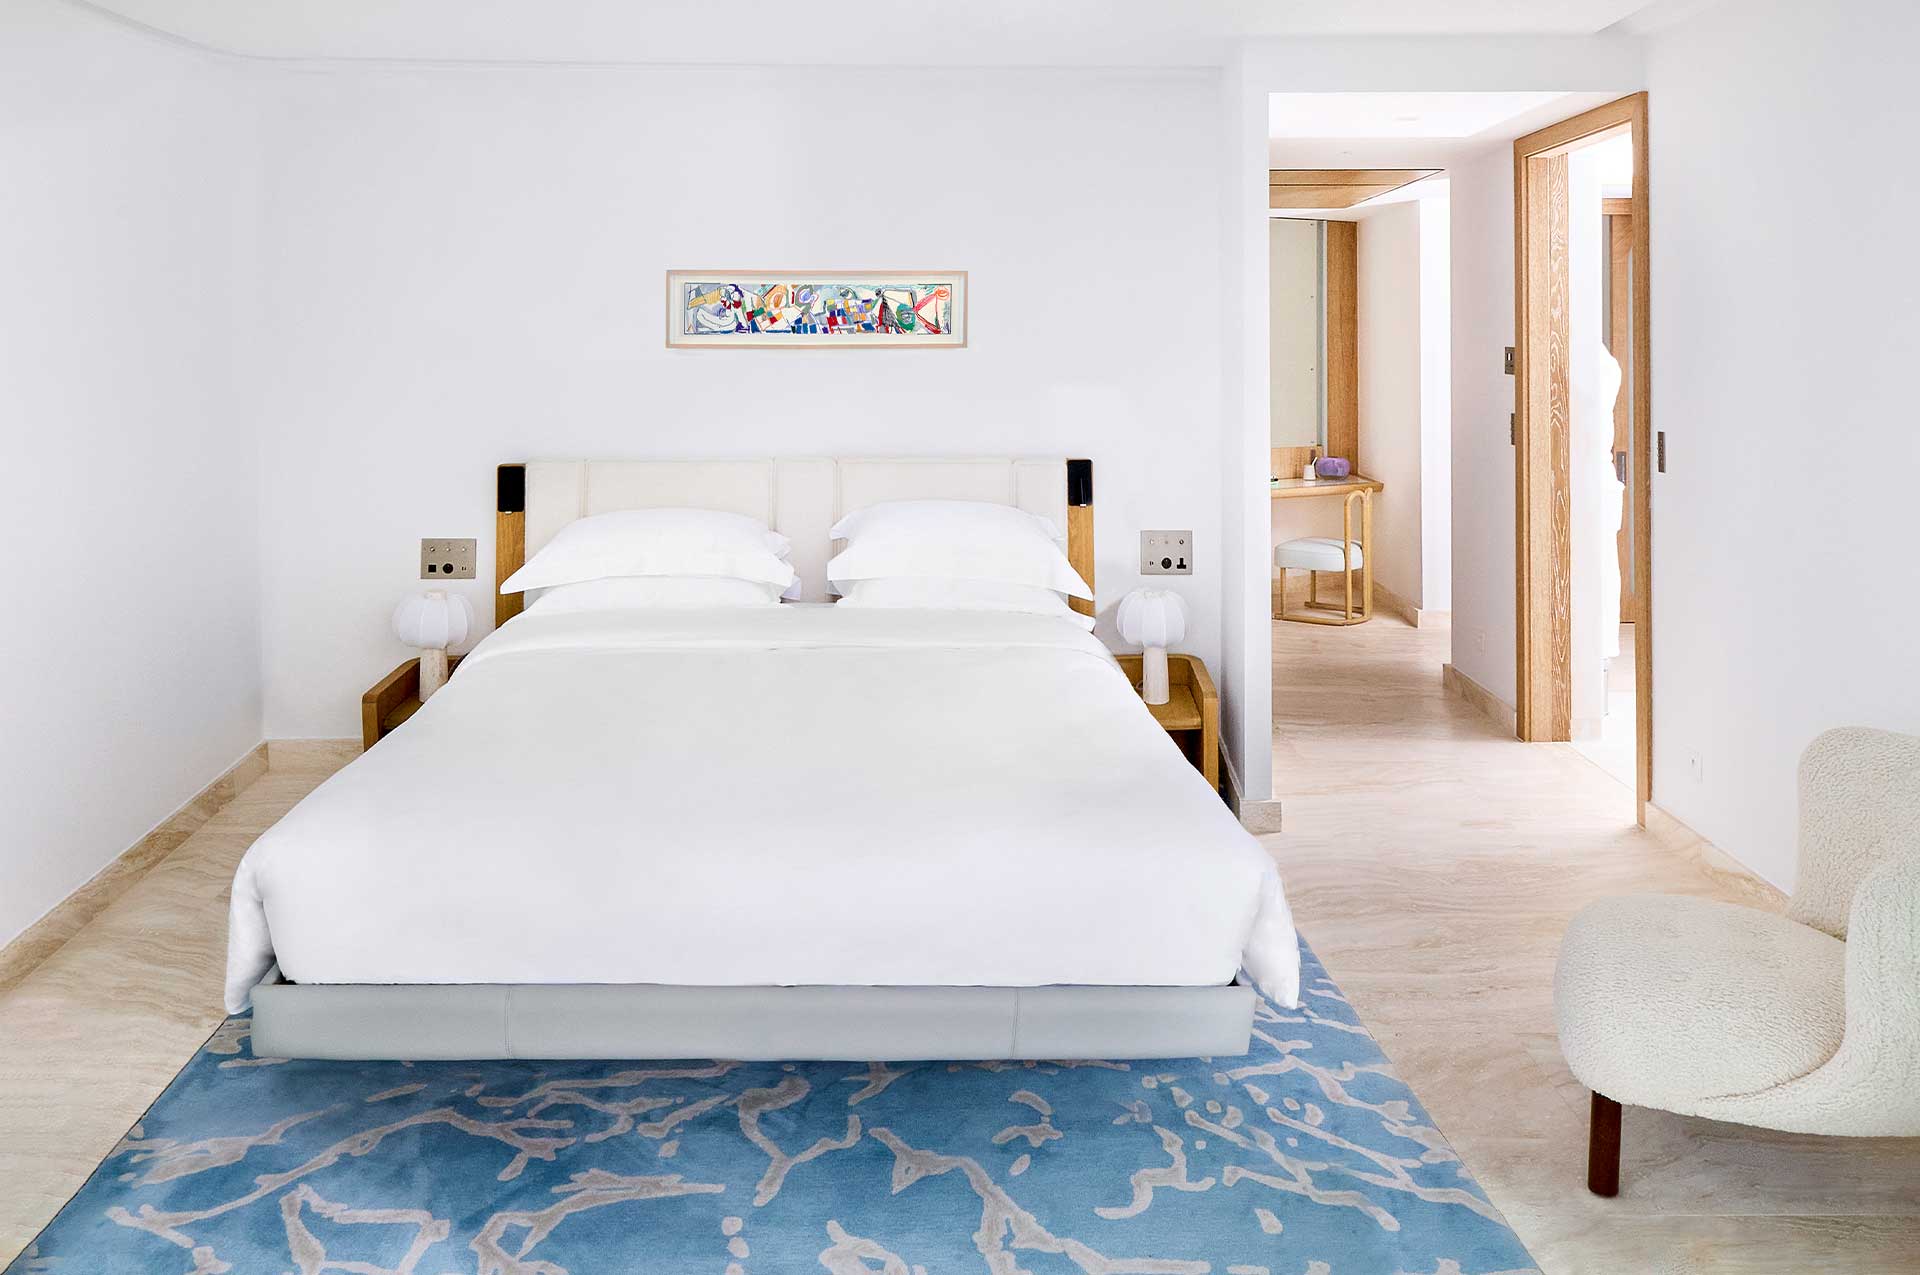 The Sea View Suite features a large white bed in the centre with some colourful artwork hanging above the bed. The open door on the right leads to the brightly lit, wooden dressing area.